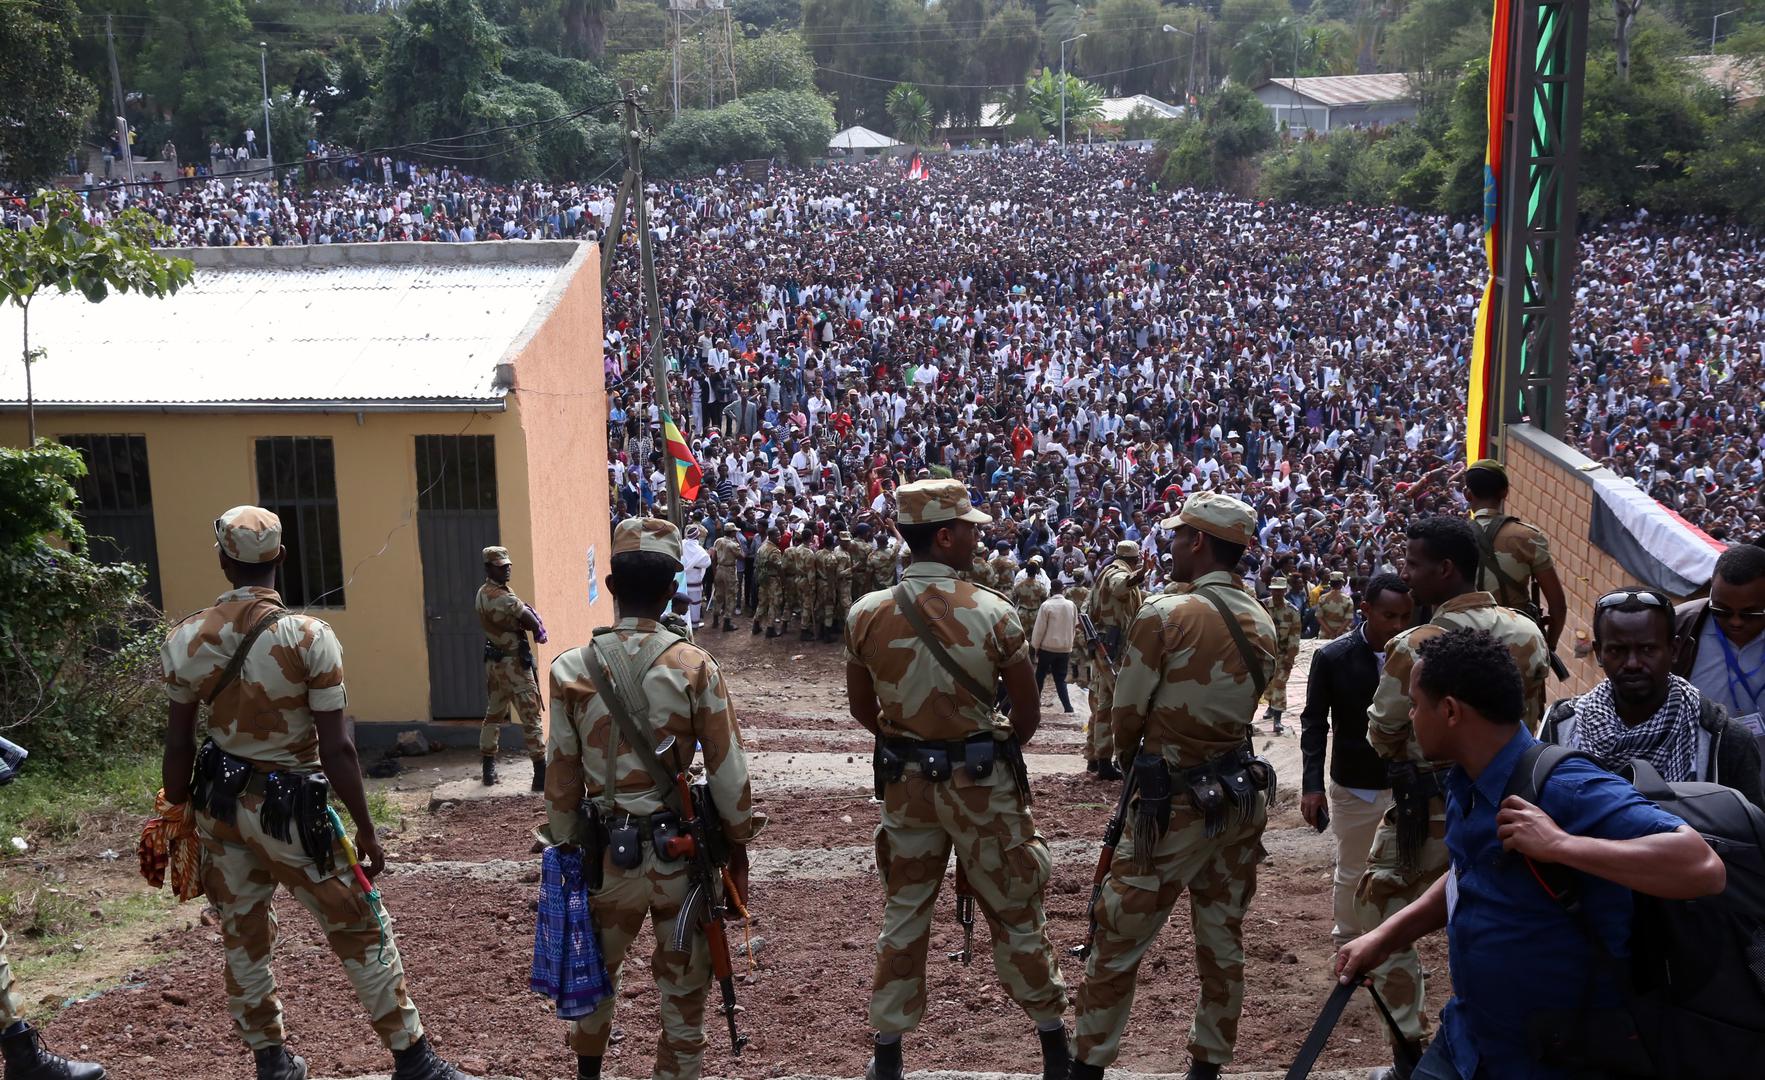 Armed security officials watch as protesters stage a protest against government during the Irreechaa cultural festival in Bishoftu, Ethiopia on October 02, 2016.